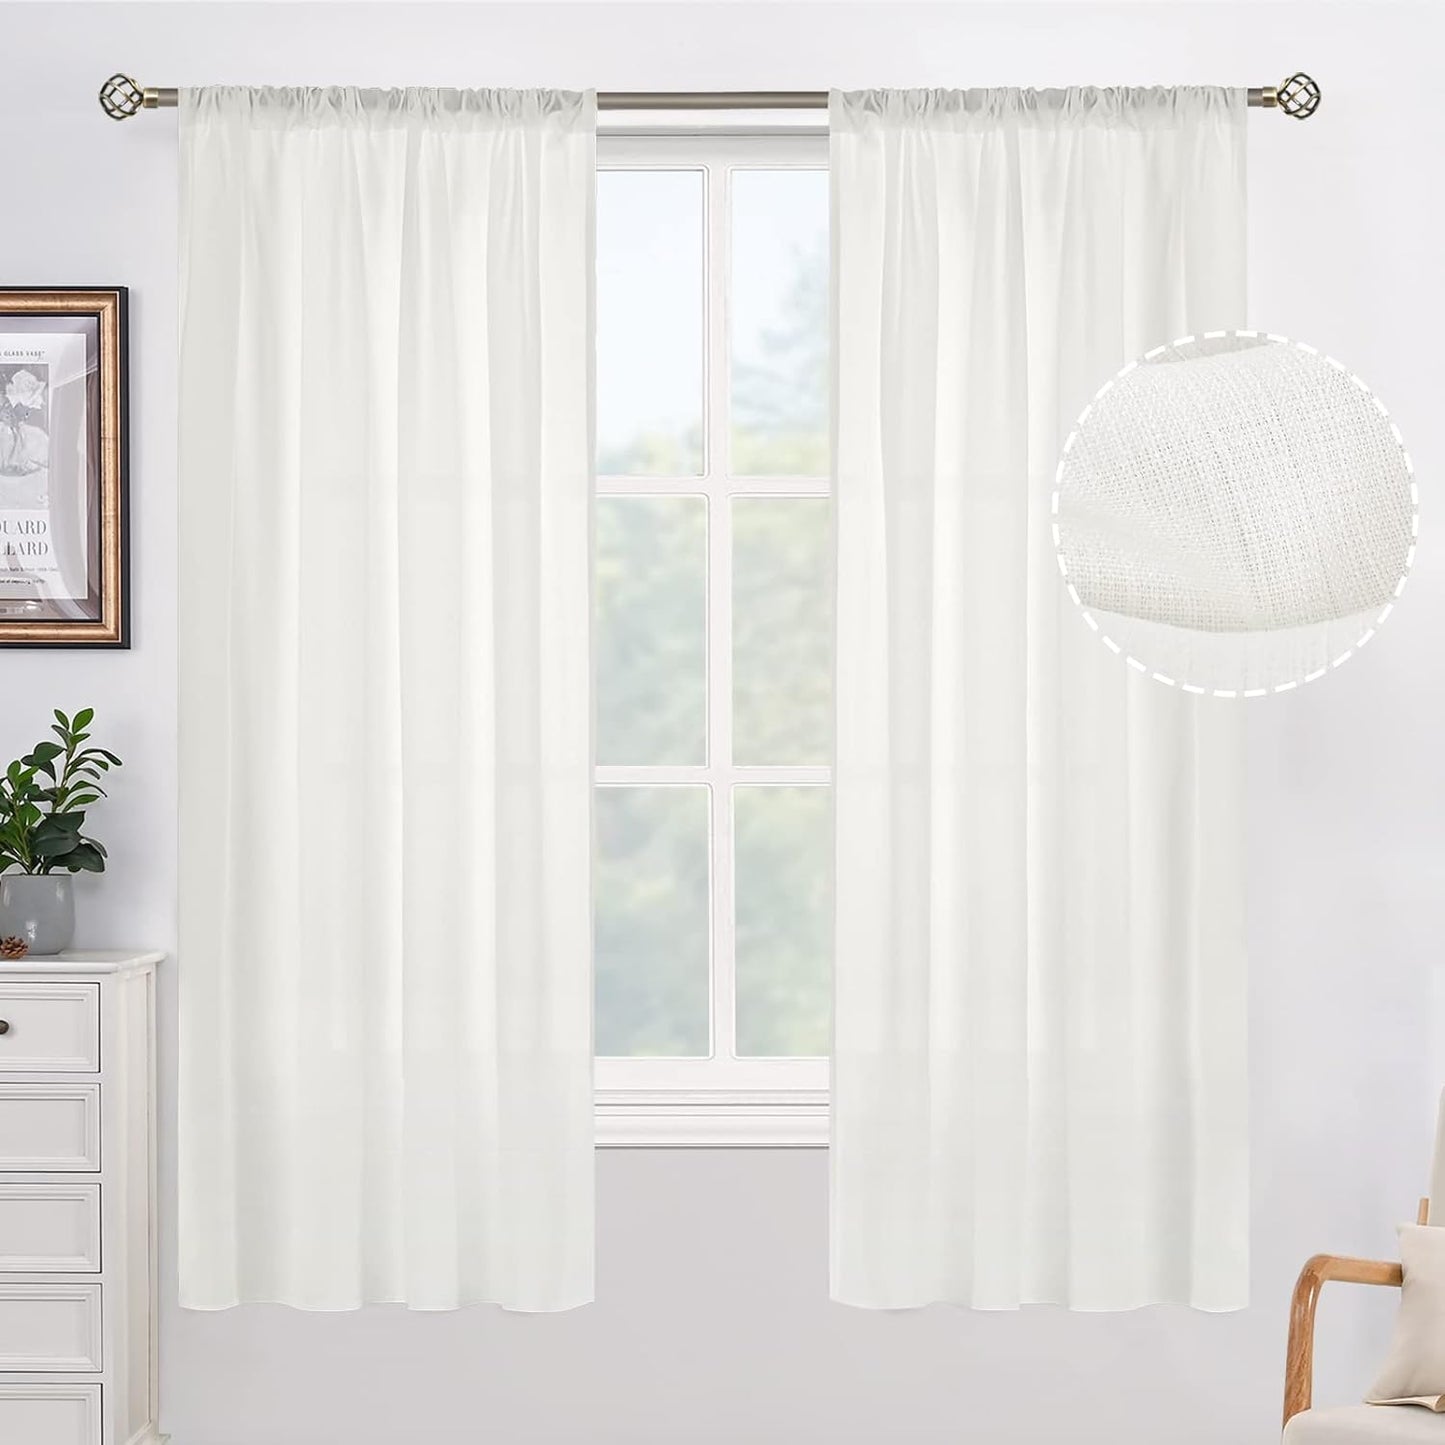 Bgment White Semi Sheer Curtains 95 Inch for Bedroom, Linen Look Rod Pocket Light Filtering Privacy Sheer Curtains for Living Room, Opaque White Sheer Curtains 2 Panels, Each 42 X 95 Inch  BGment Ivory Cream 42W X 63L 